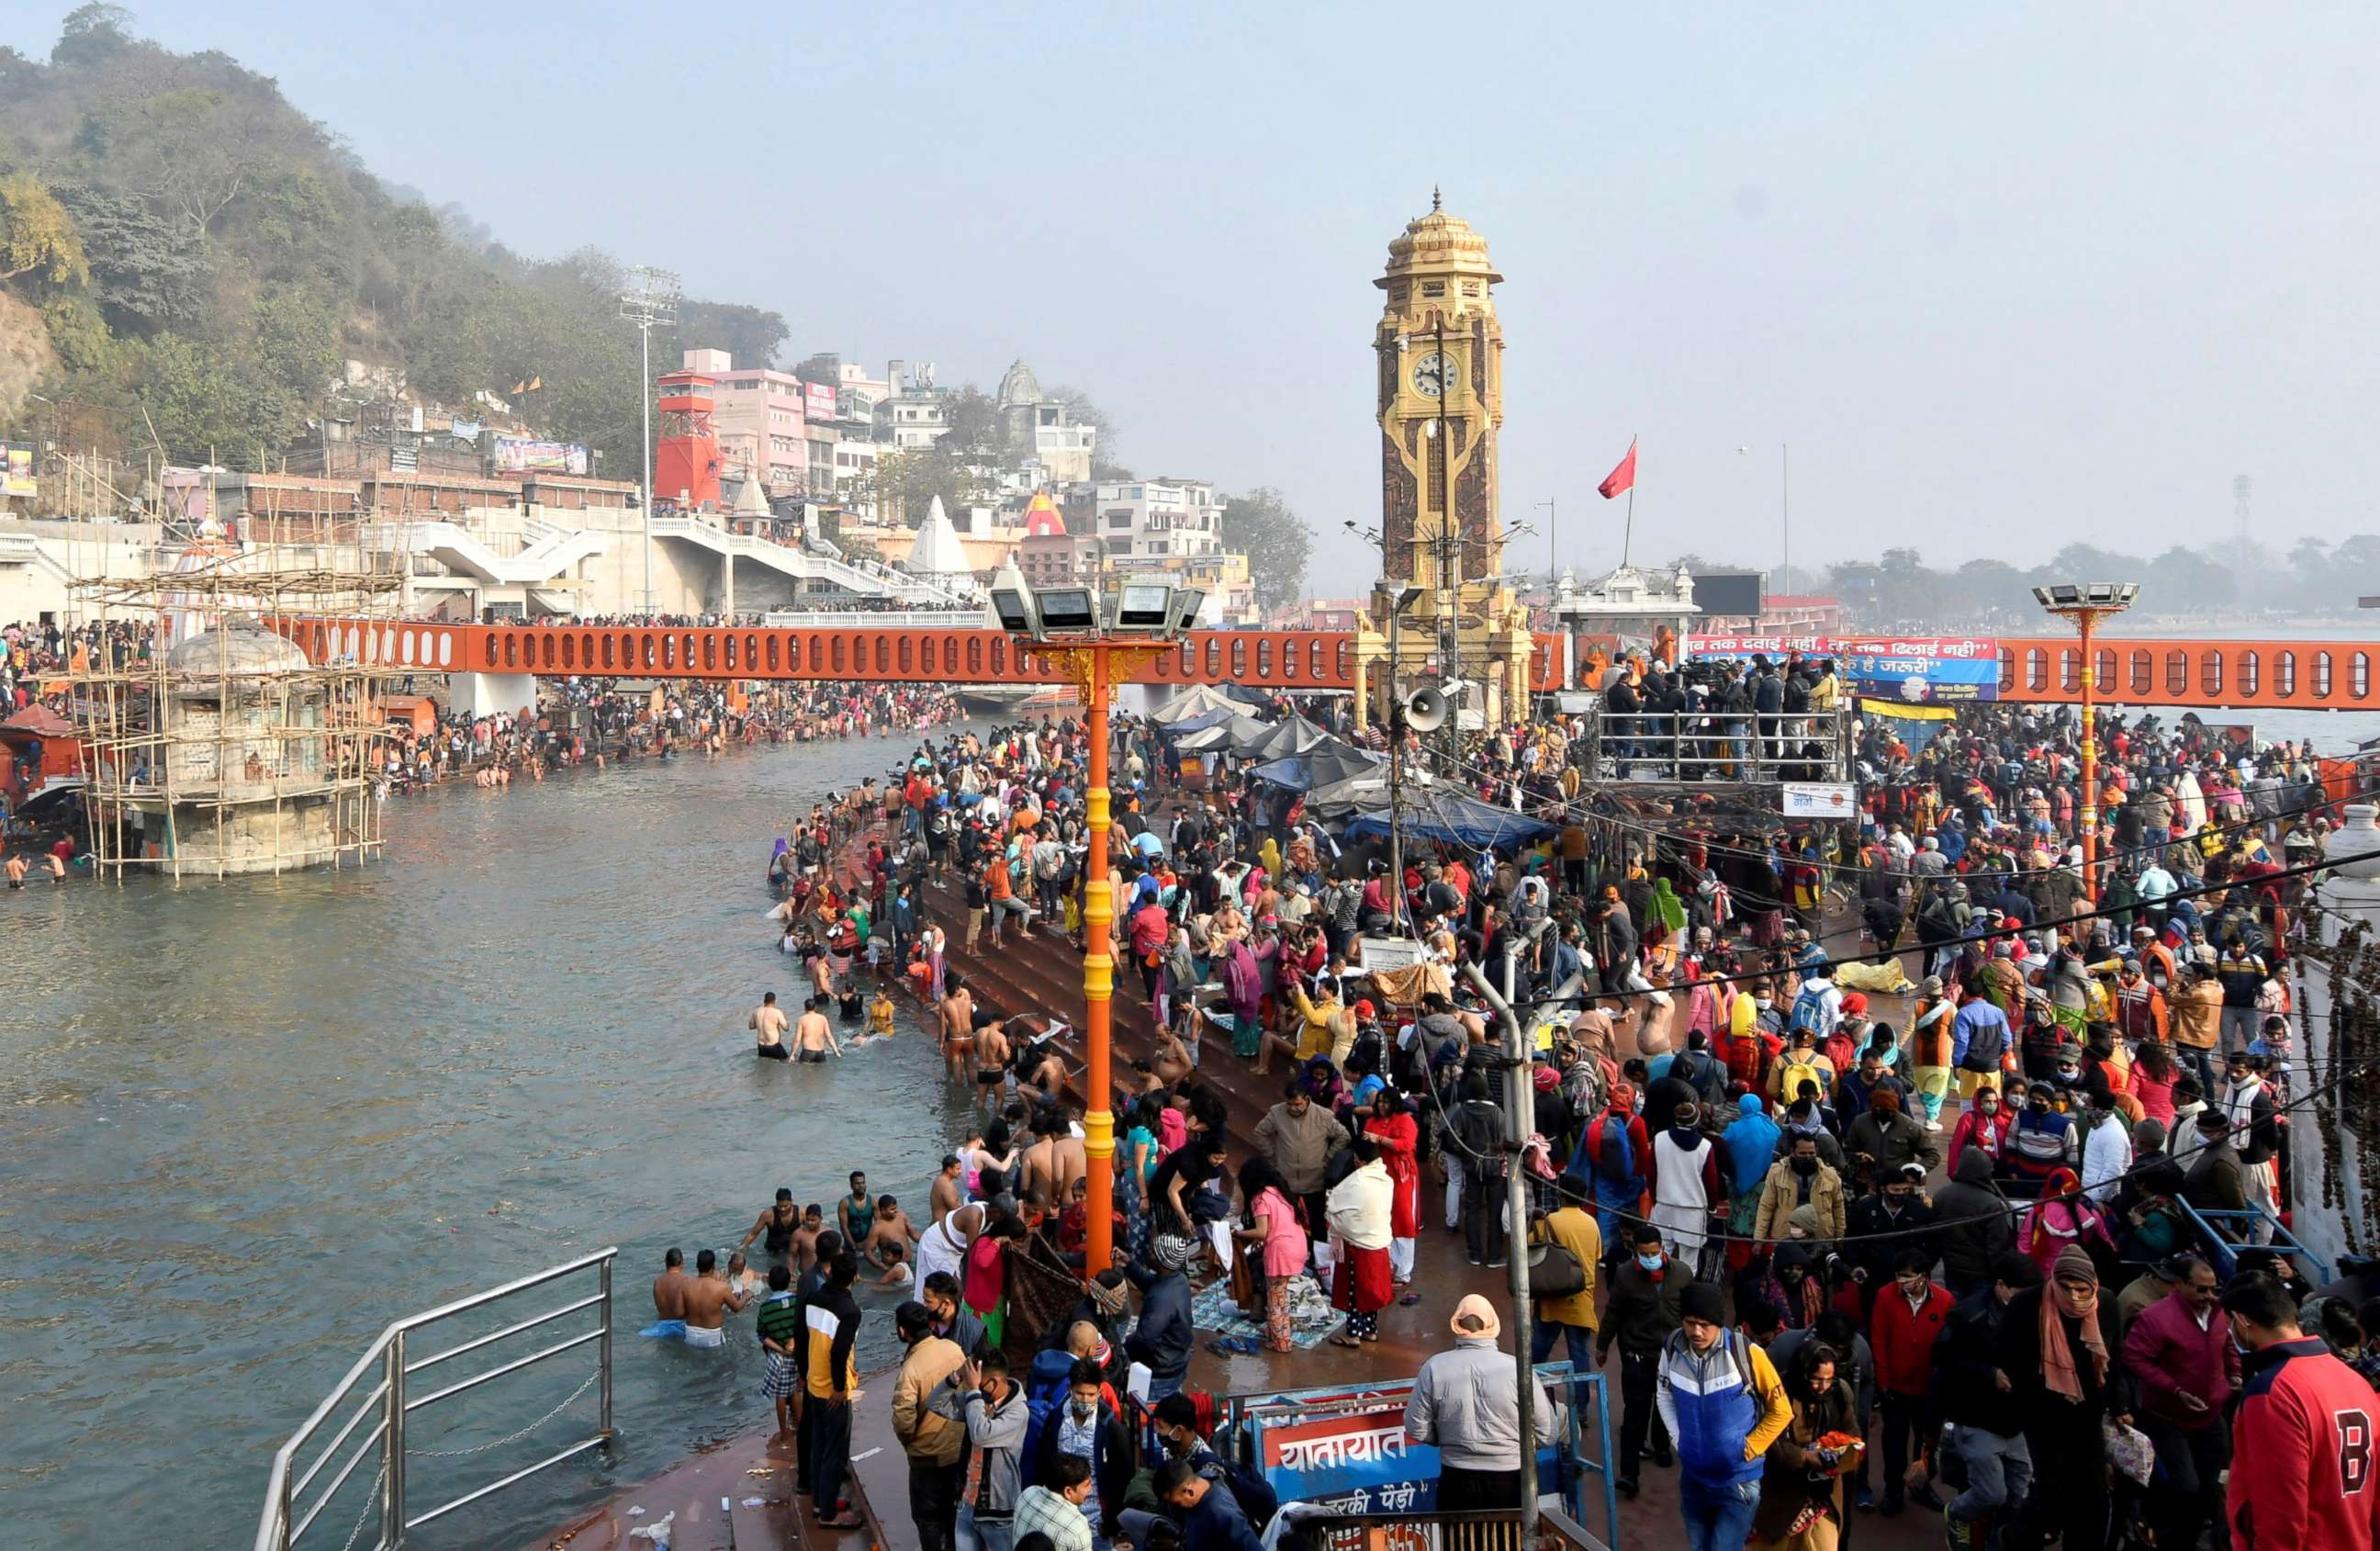 PHOTO: Hindu devotees gather to take a holy dip in the waters of river Ganges to mark "Makar Sankranti" festival, which falls on the first day of the religious Kumbh Mela, or "festival of the pot." 